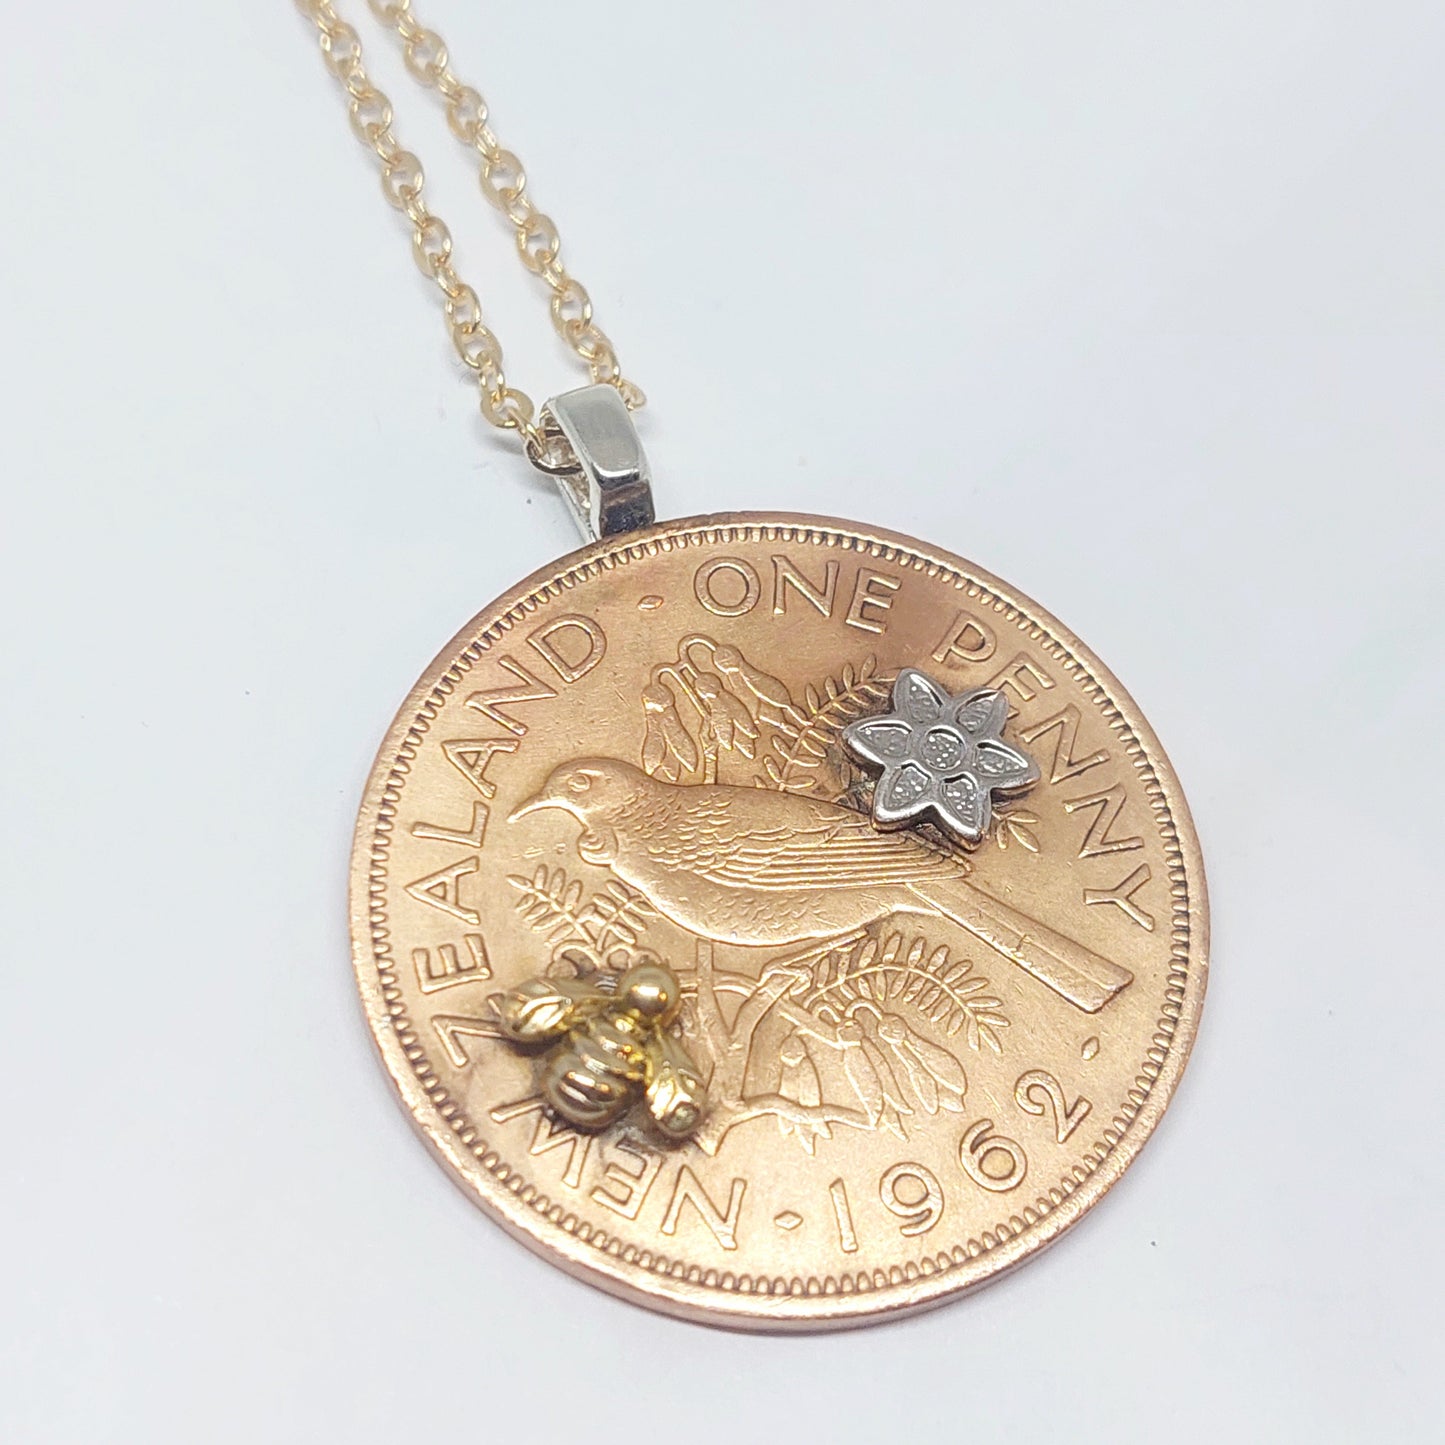 Bestseller! NEW!! Re-minted One Penny Pendant with Tiny Embellishments